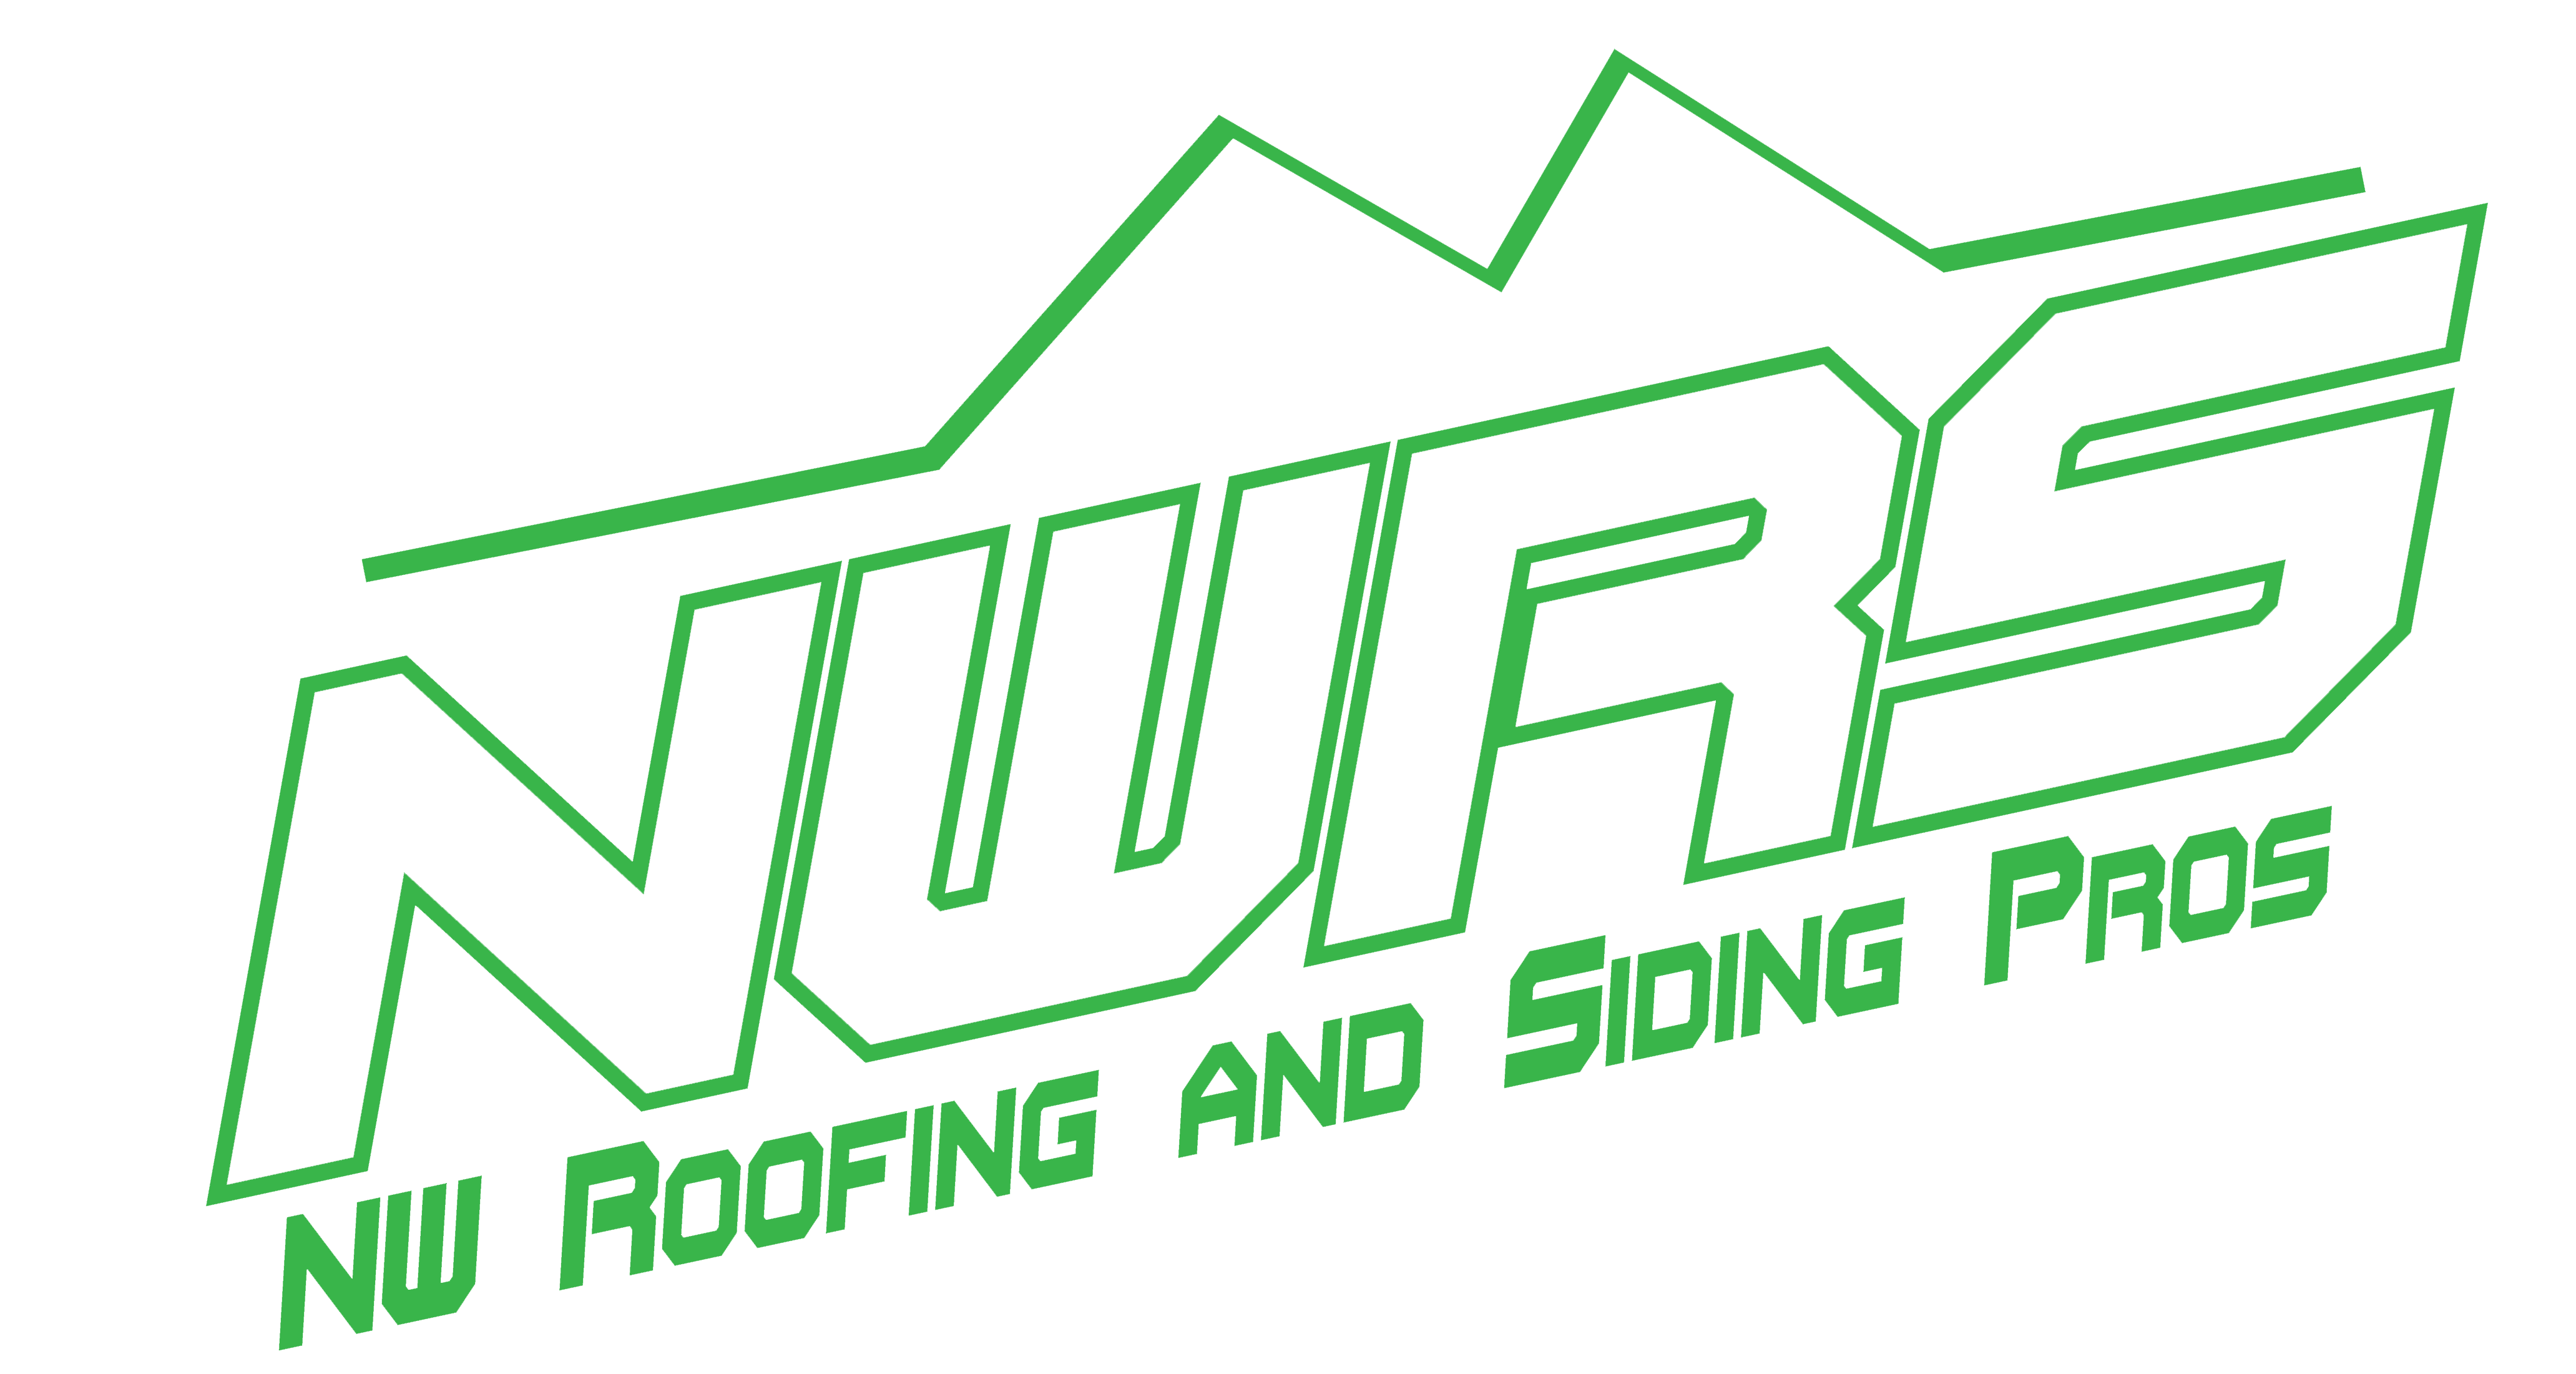 NW Roofing and Siding Pros Eugene, OR